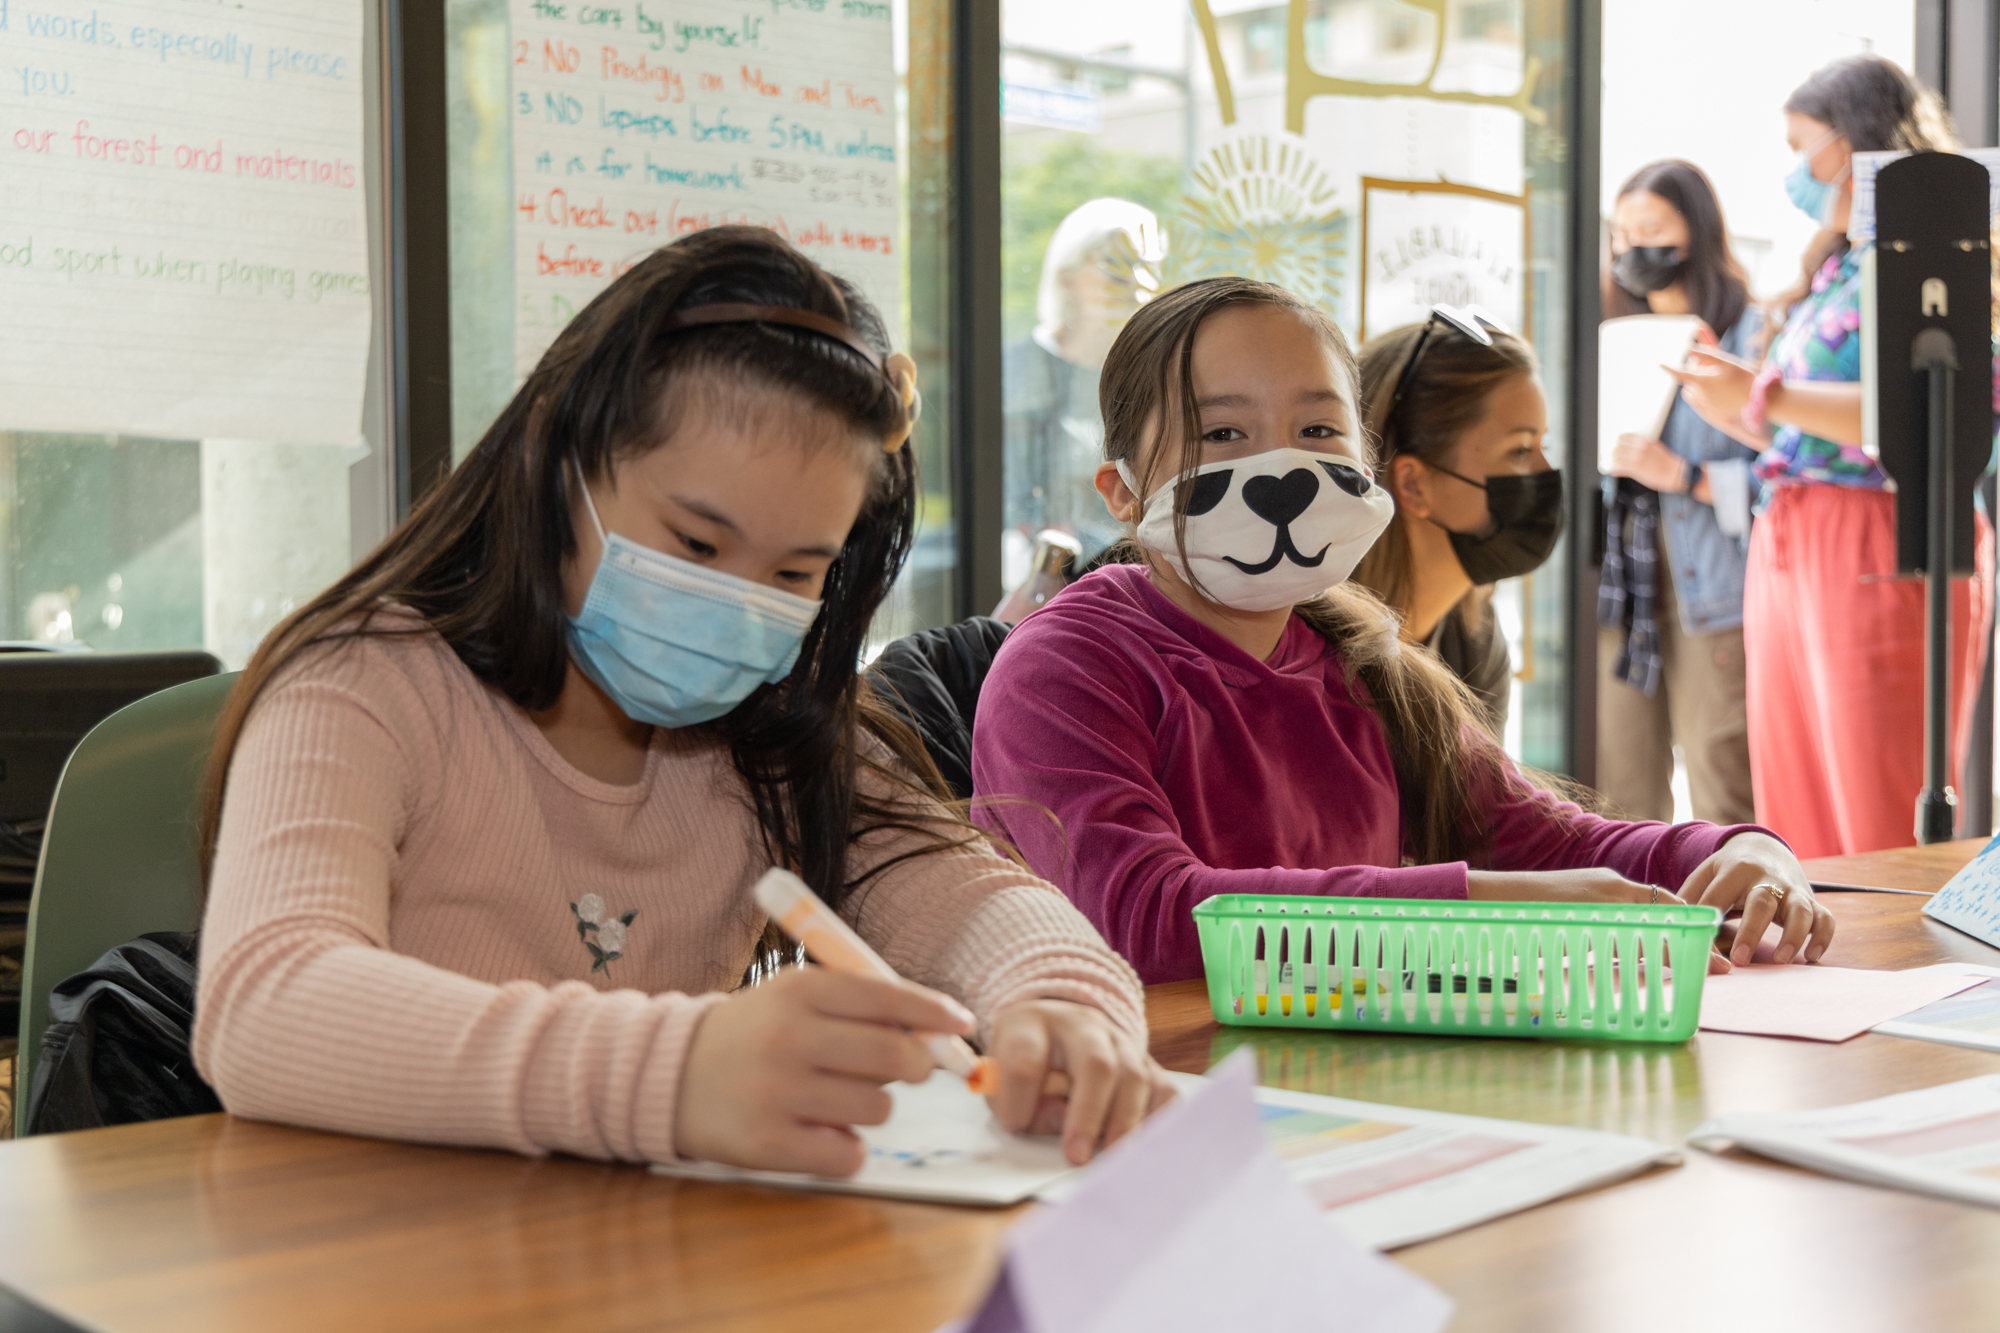 Two girls sit at a desk wearing masks, one has a mask with a cat design, engaging in a classroom activity.